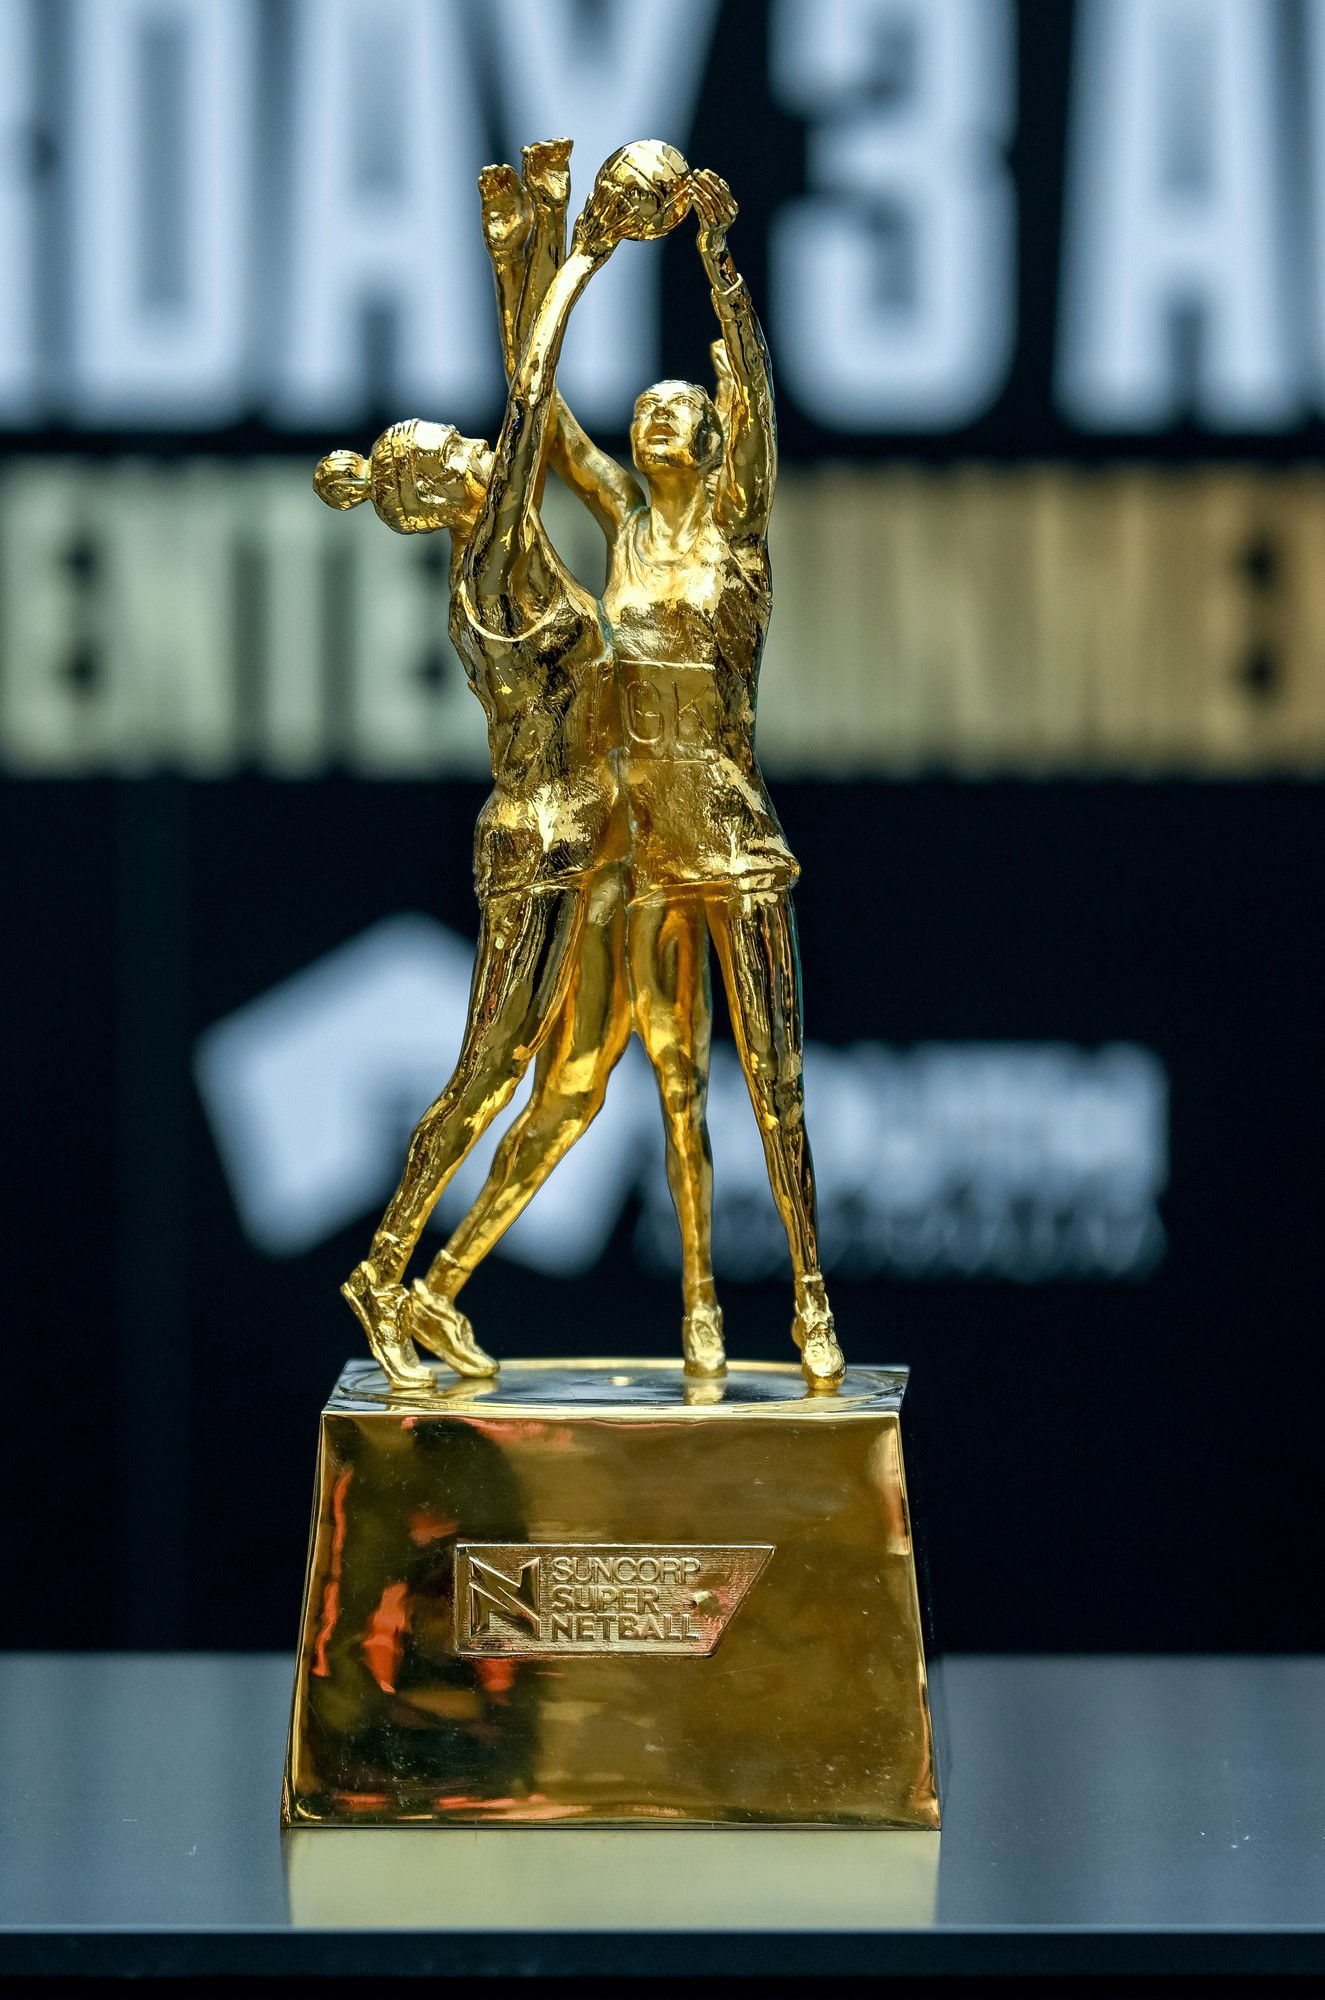 Super Netball trophy depicts two players going for the ball